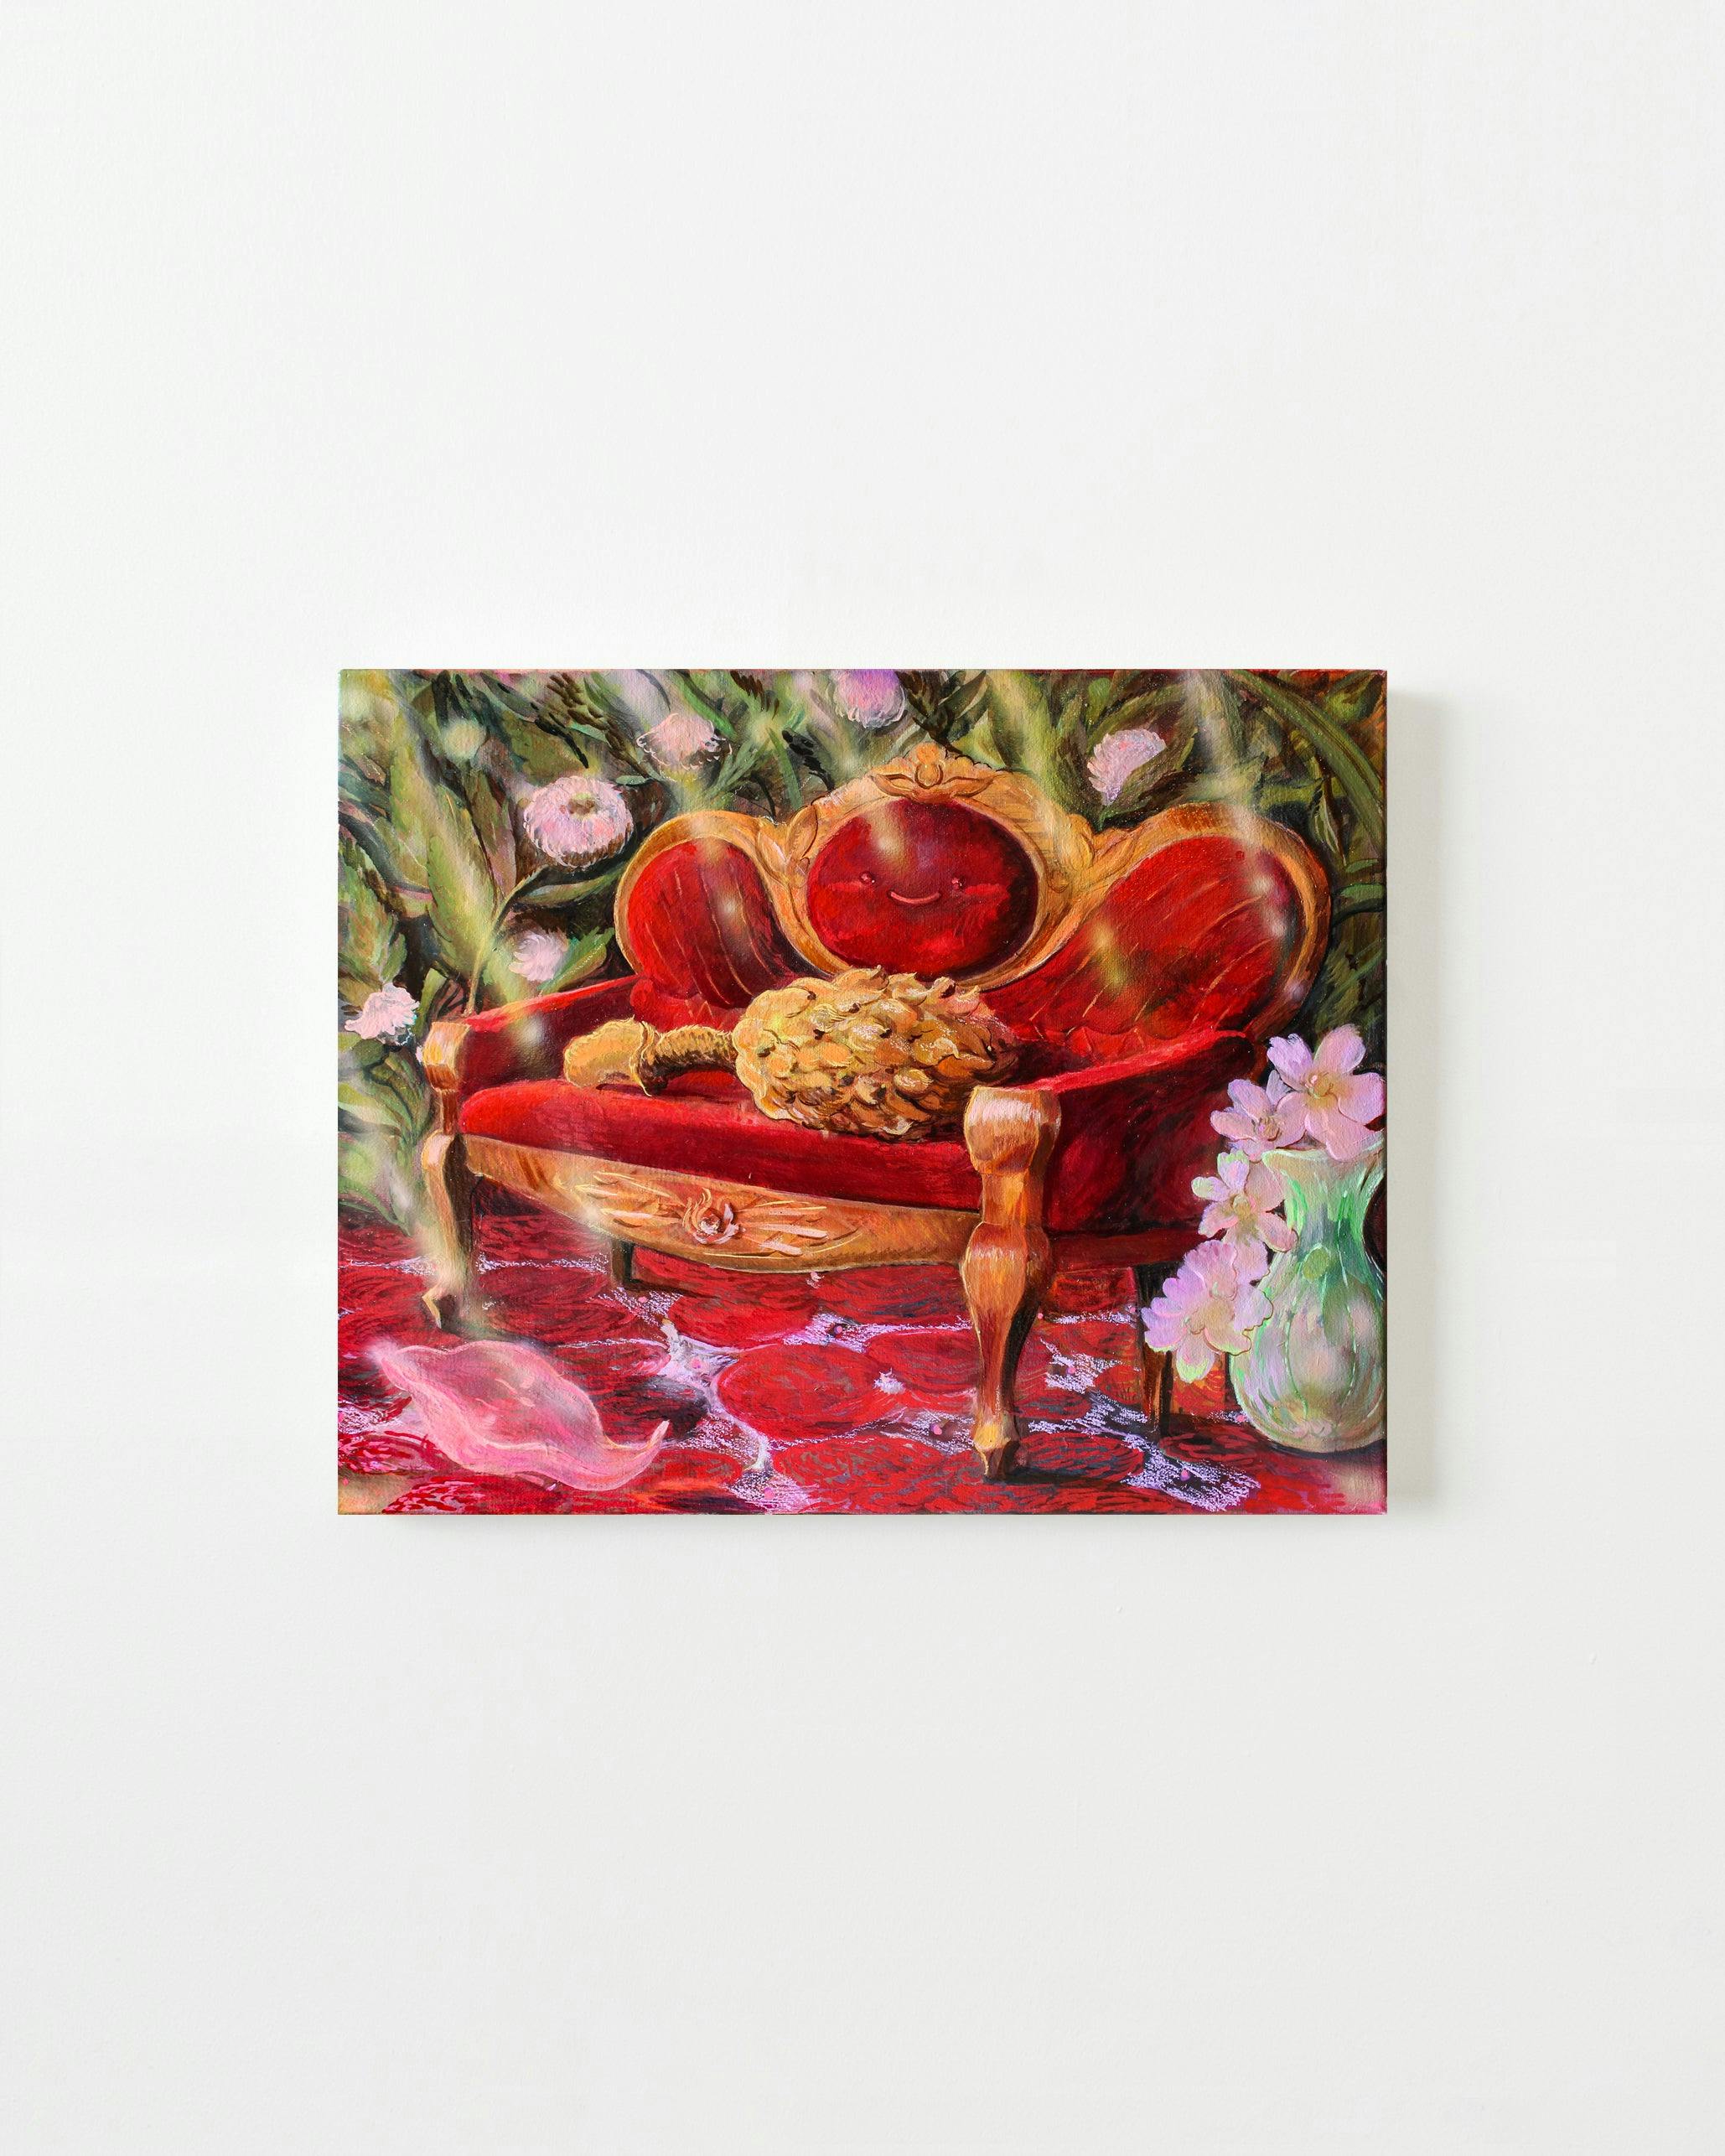 Painting by Nefertiti Jenkins titled "Magnolia Couch".